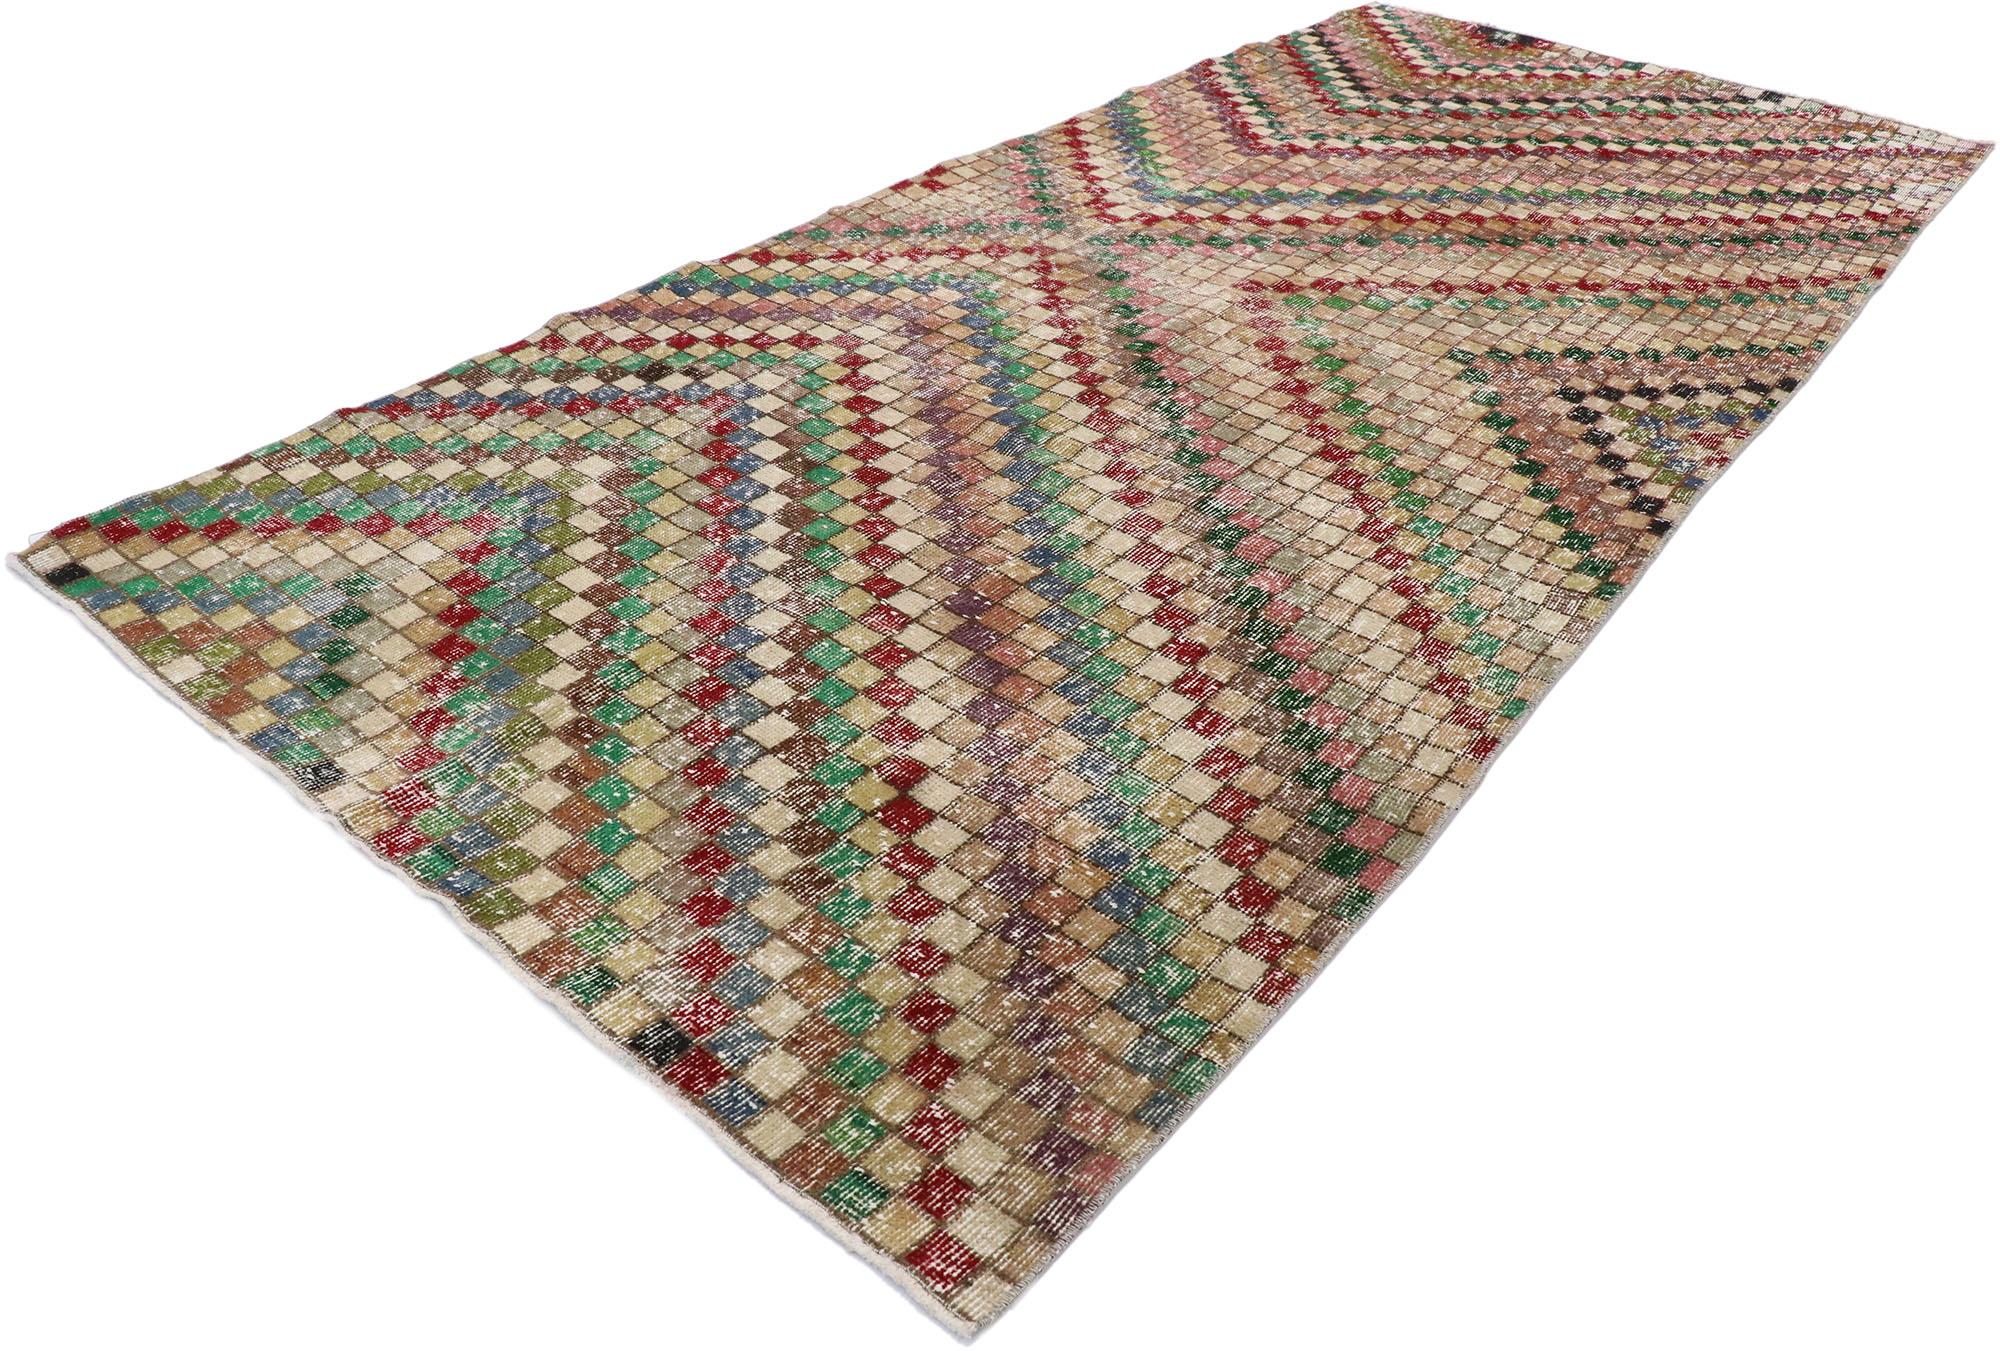 53324, distressed vintage Turkish Sivas rug with Rustic Mid-Century Modern Cubist style. This hand knotted wool distressed vintage Turkish Sivas rug features an all-over checkered asymmetrical chevron pattern comprised of rows of multicolored cubes